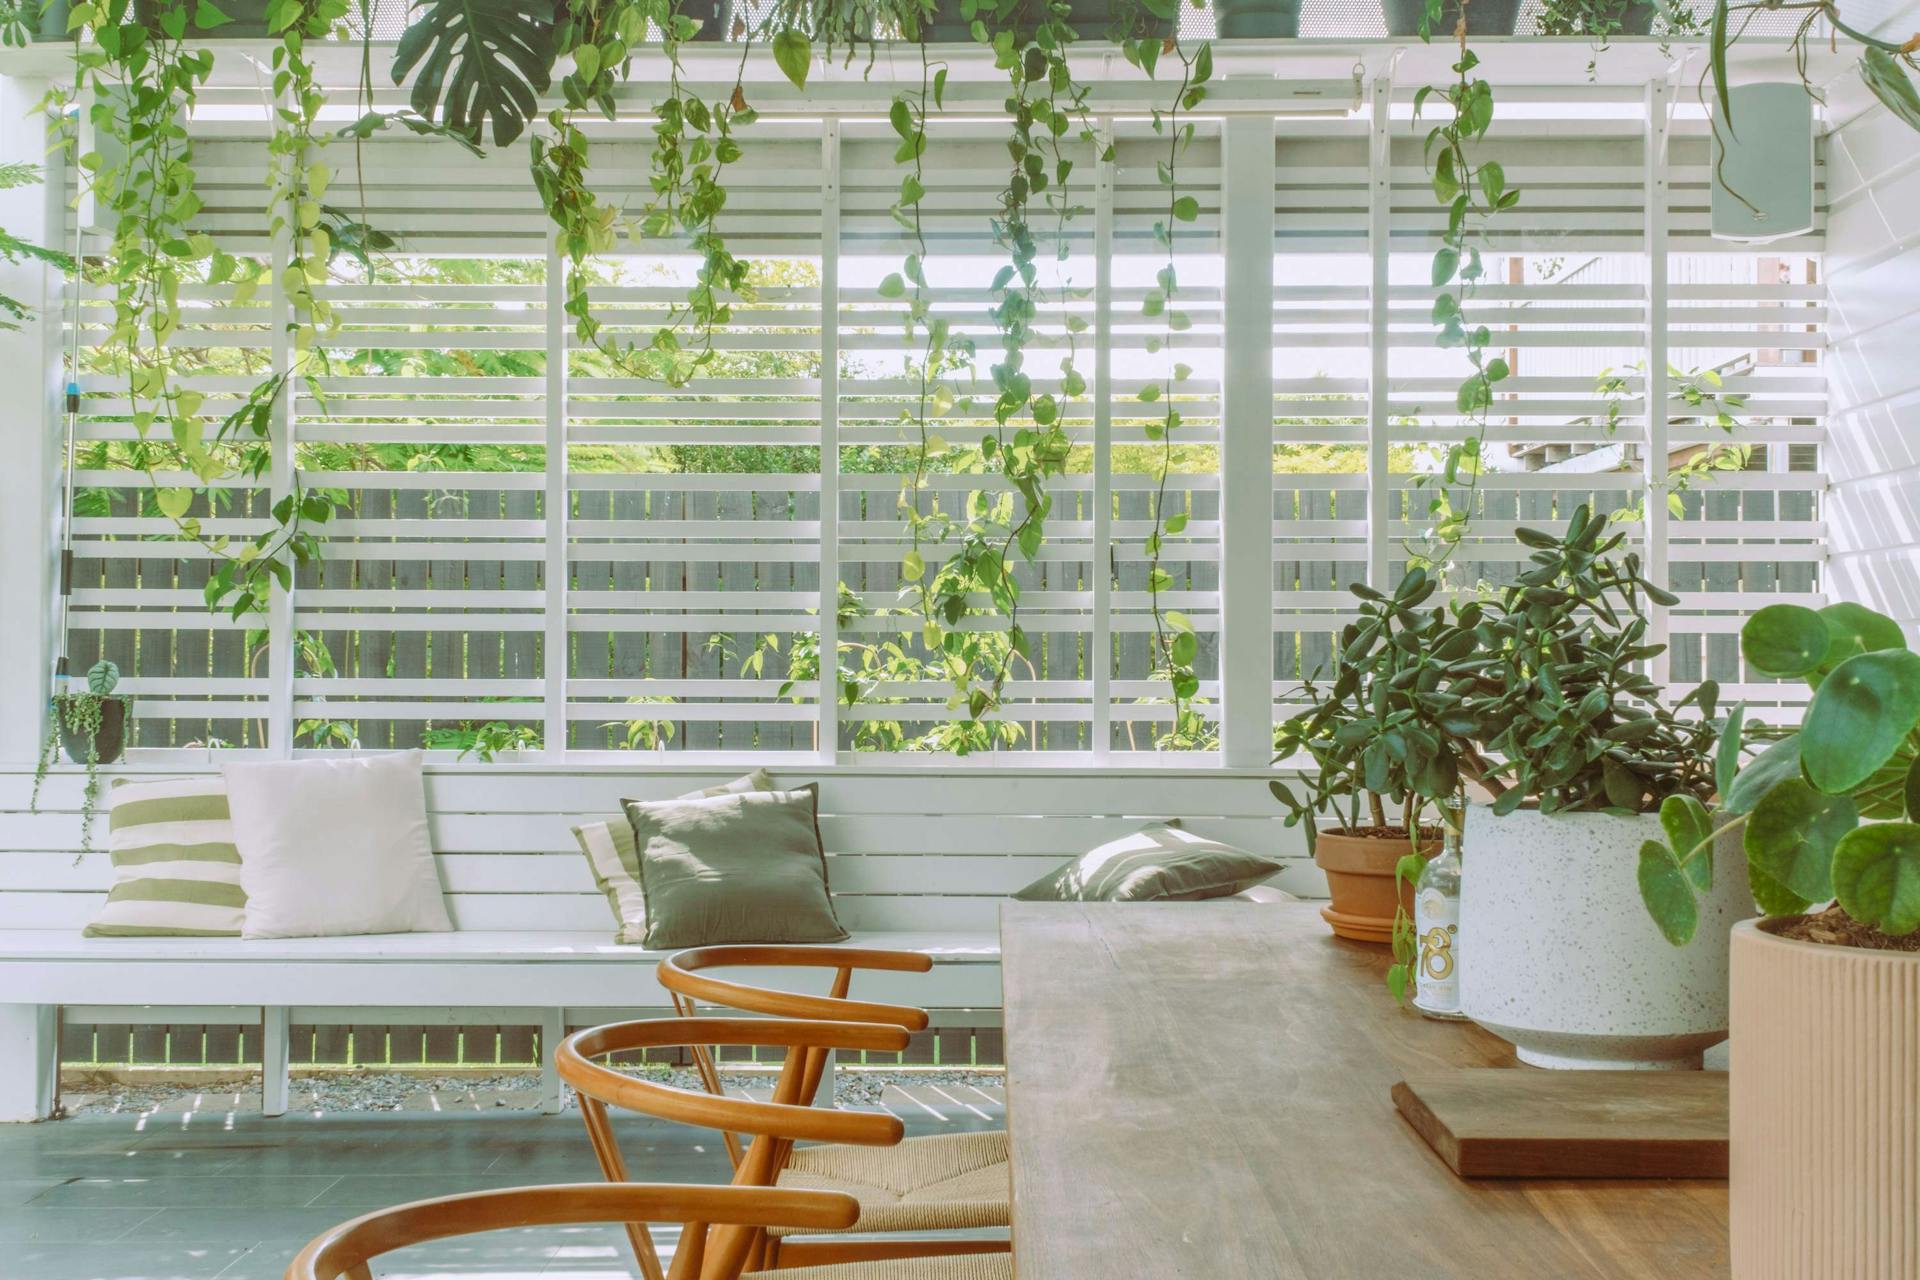 Cornerstone by Loupe Architecture. Photography by Loupe Architecture. Plants hanging over white clad sunroom. 